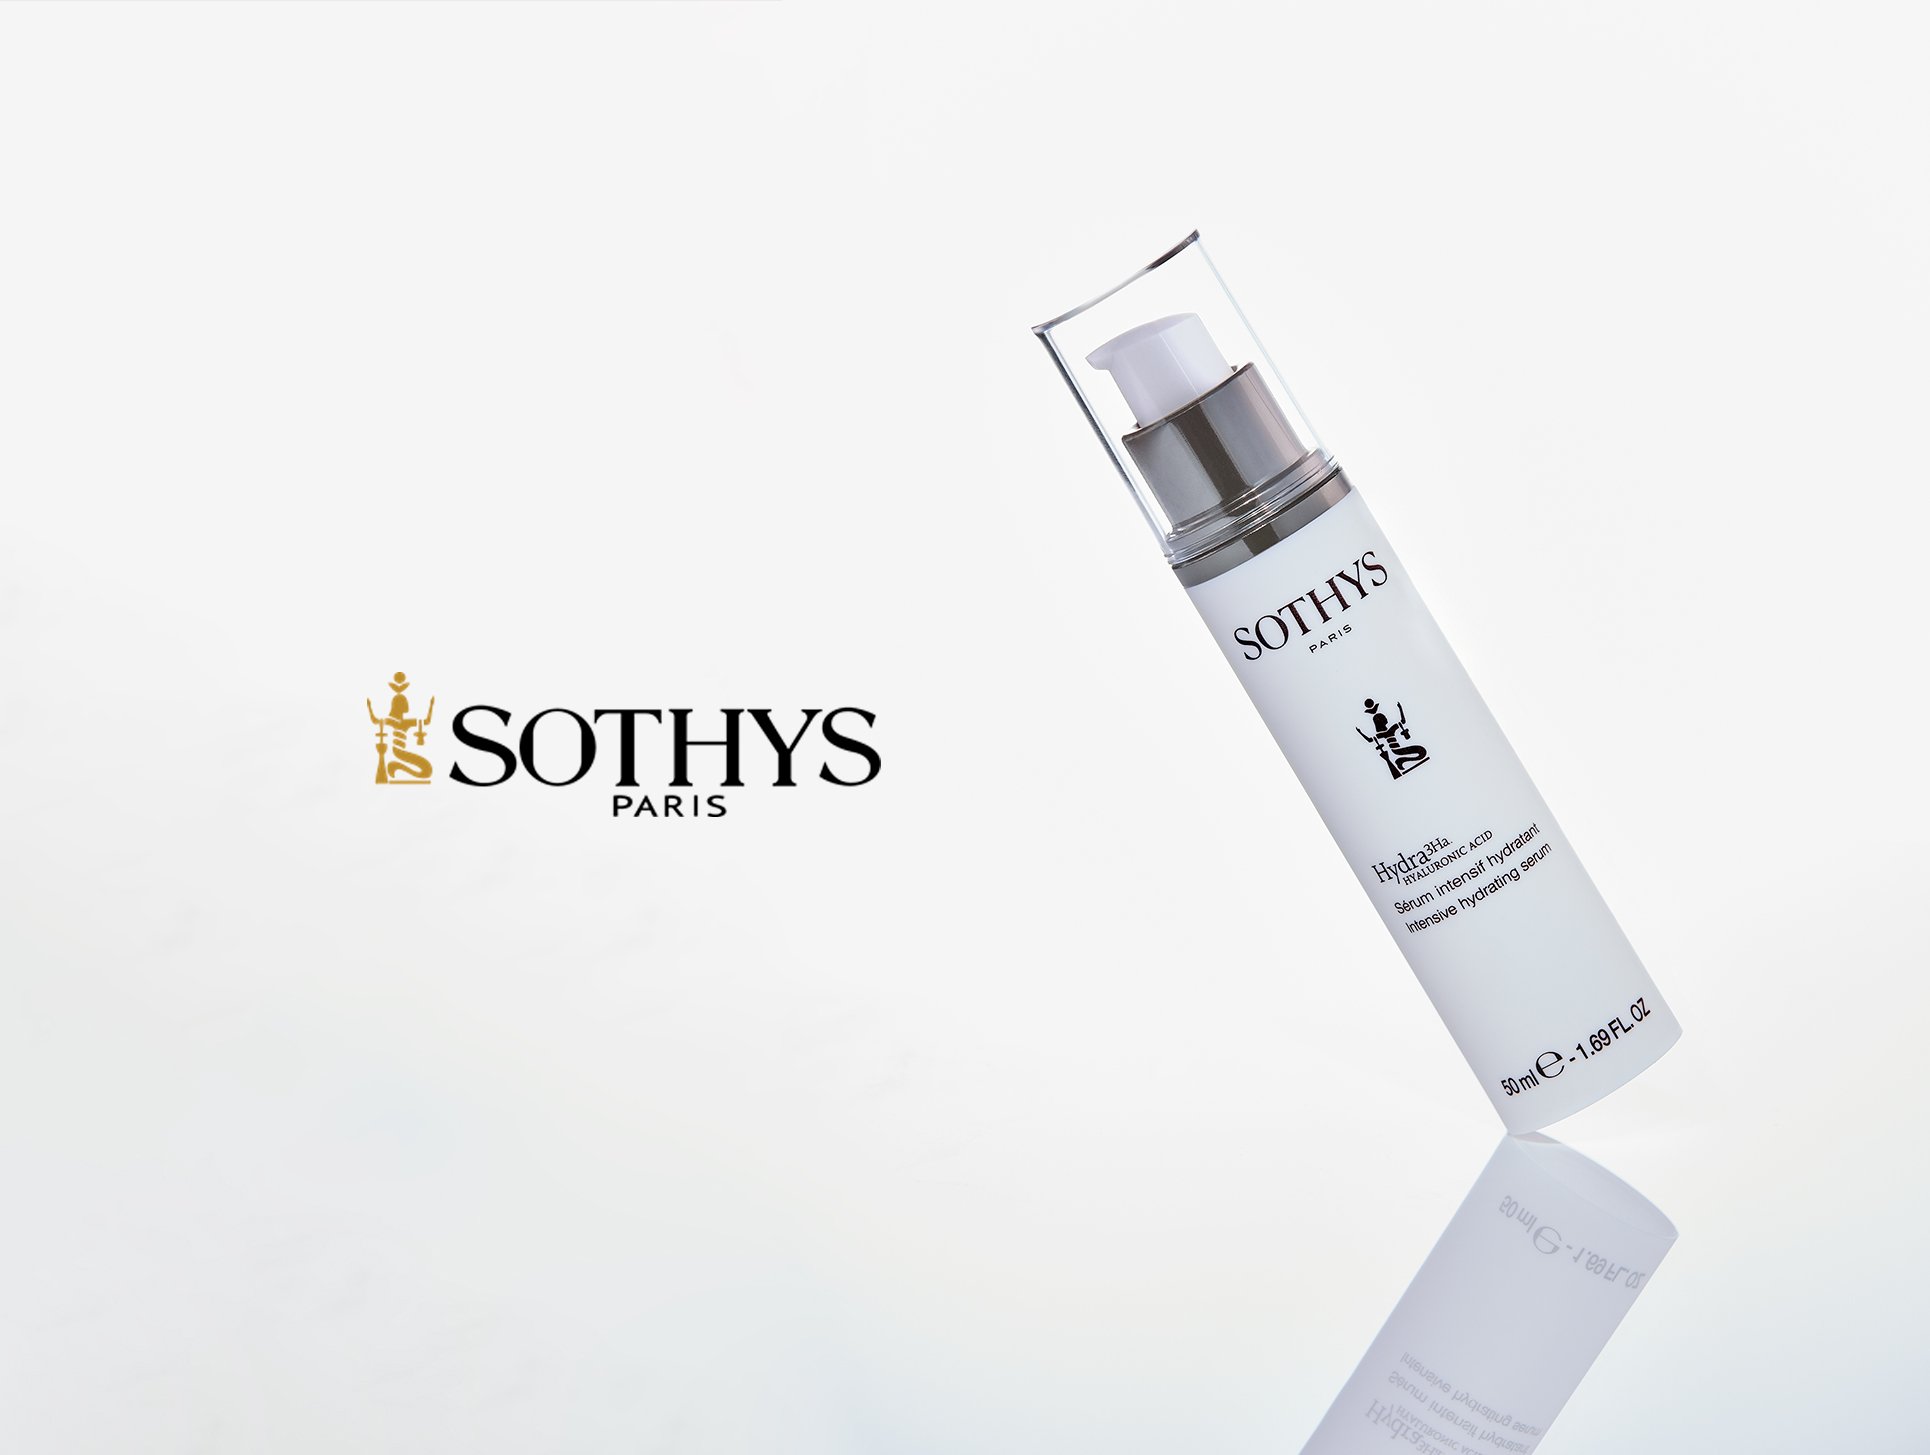 Sothys product photography